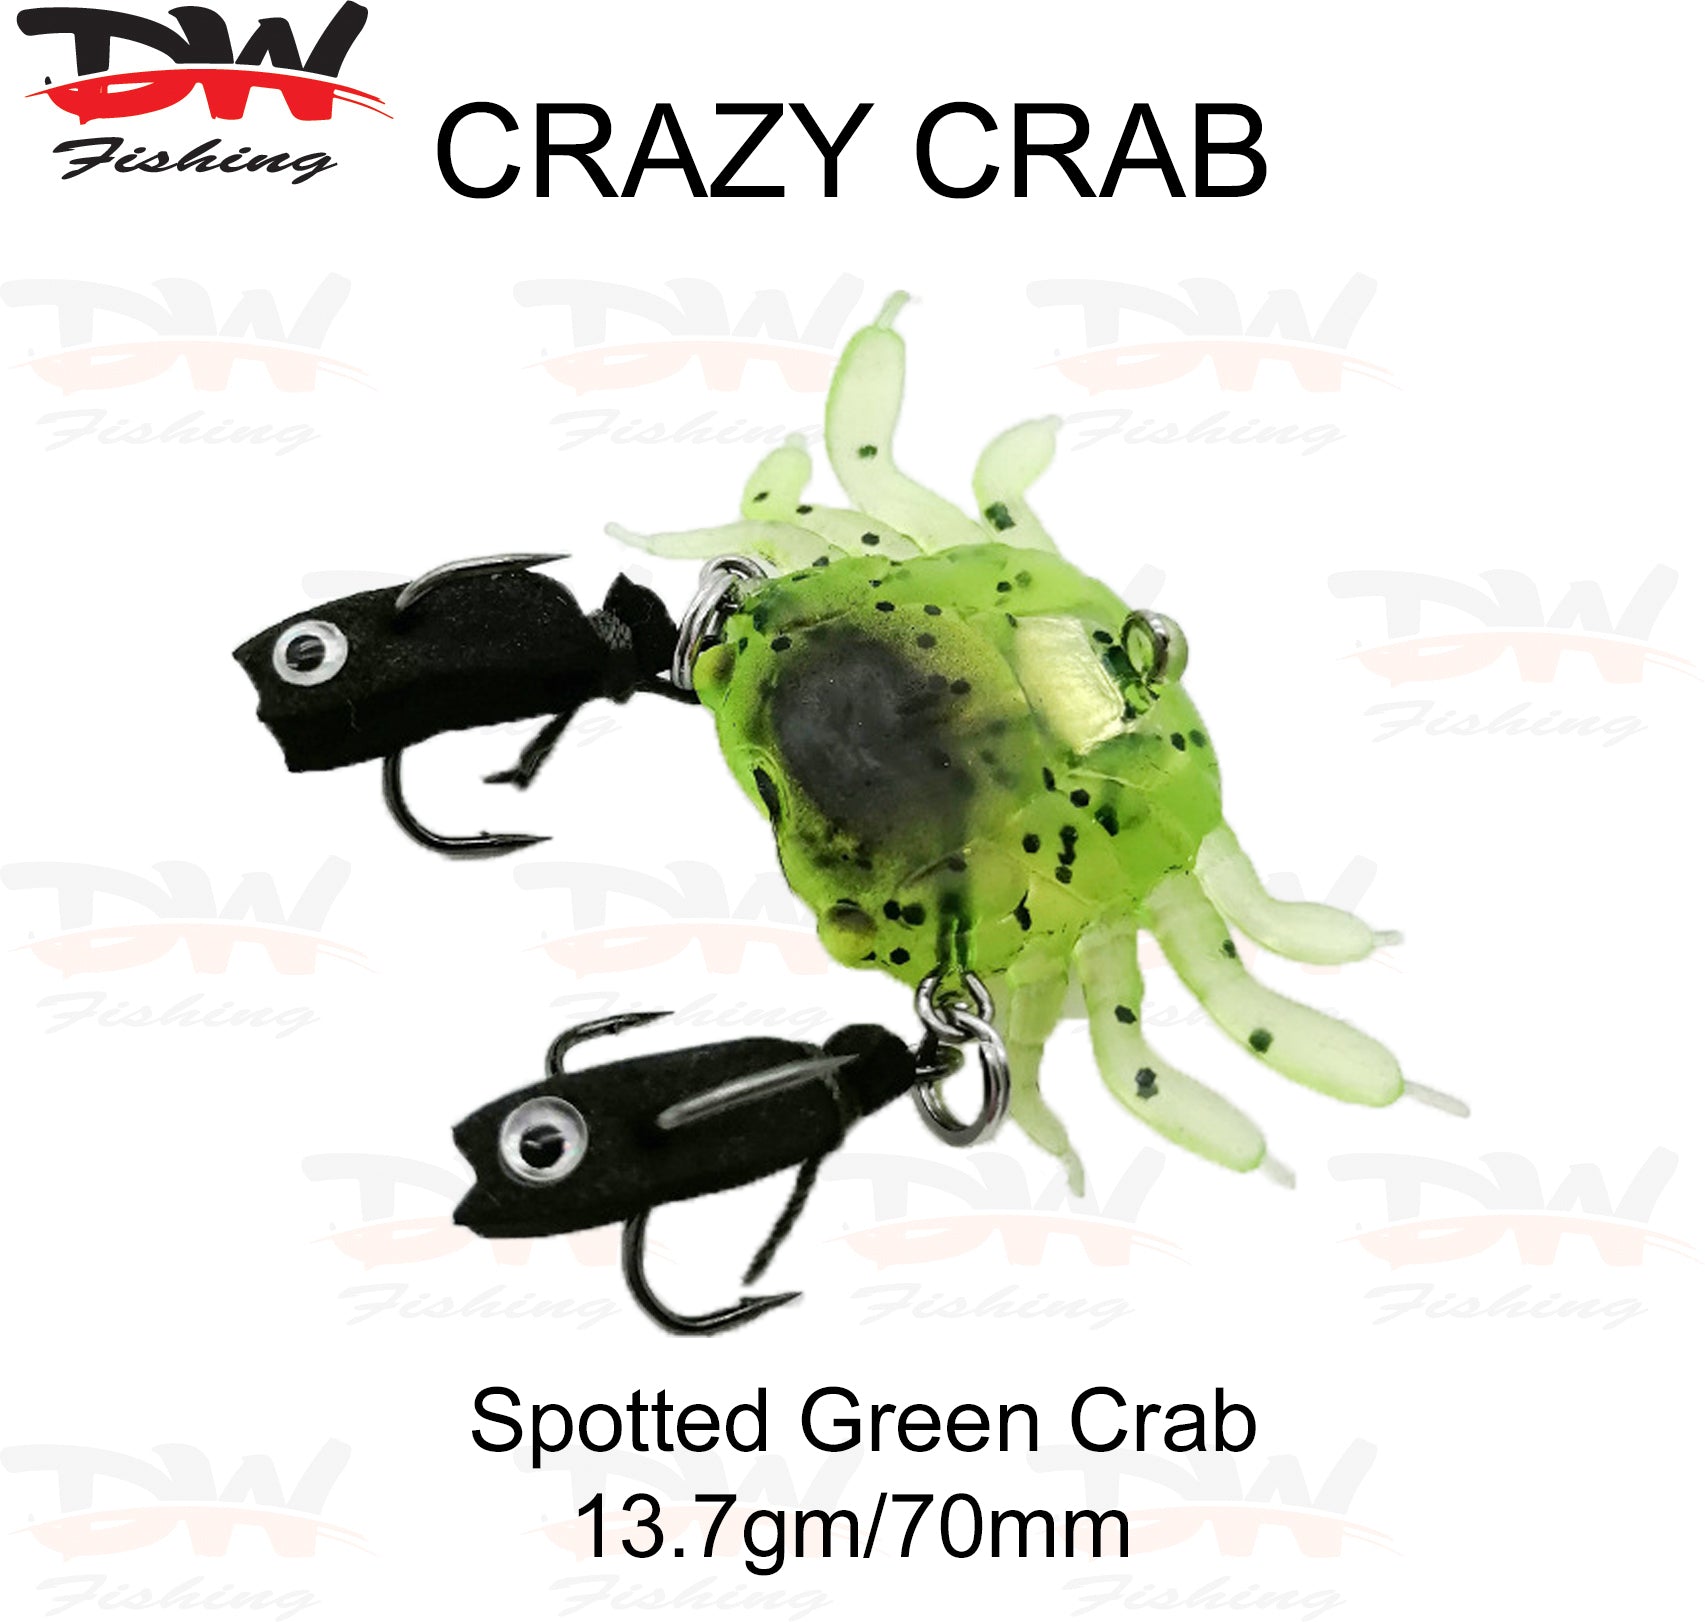 Soft Plastic Crazy Crab 70mm Lure Imitation Spotted green crab